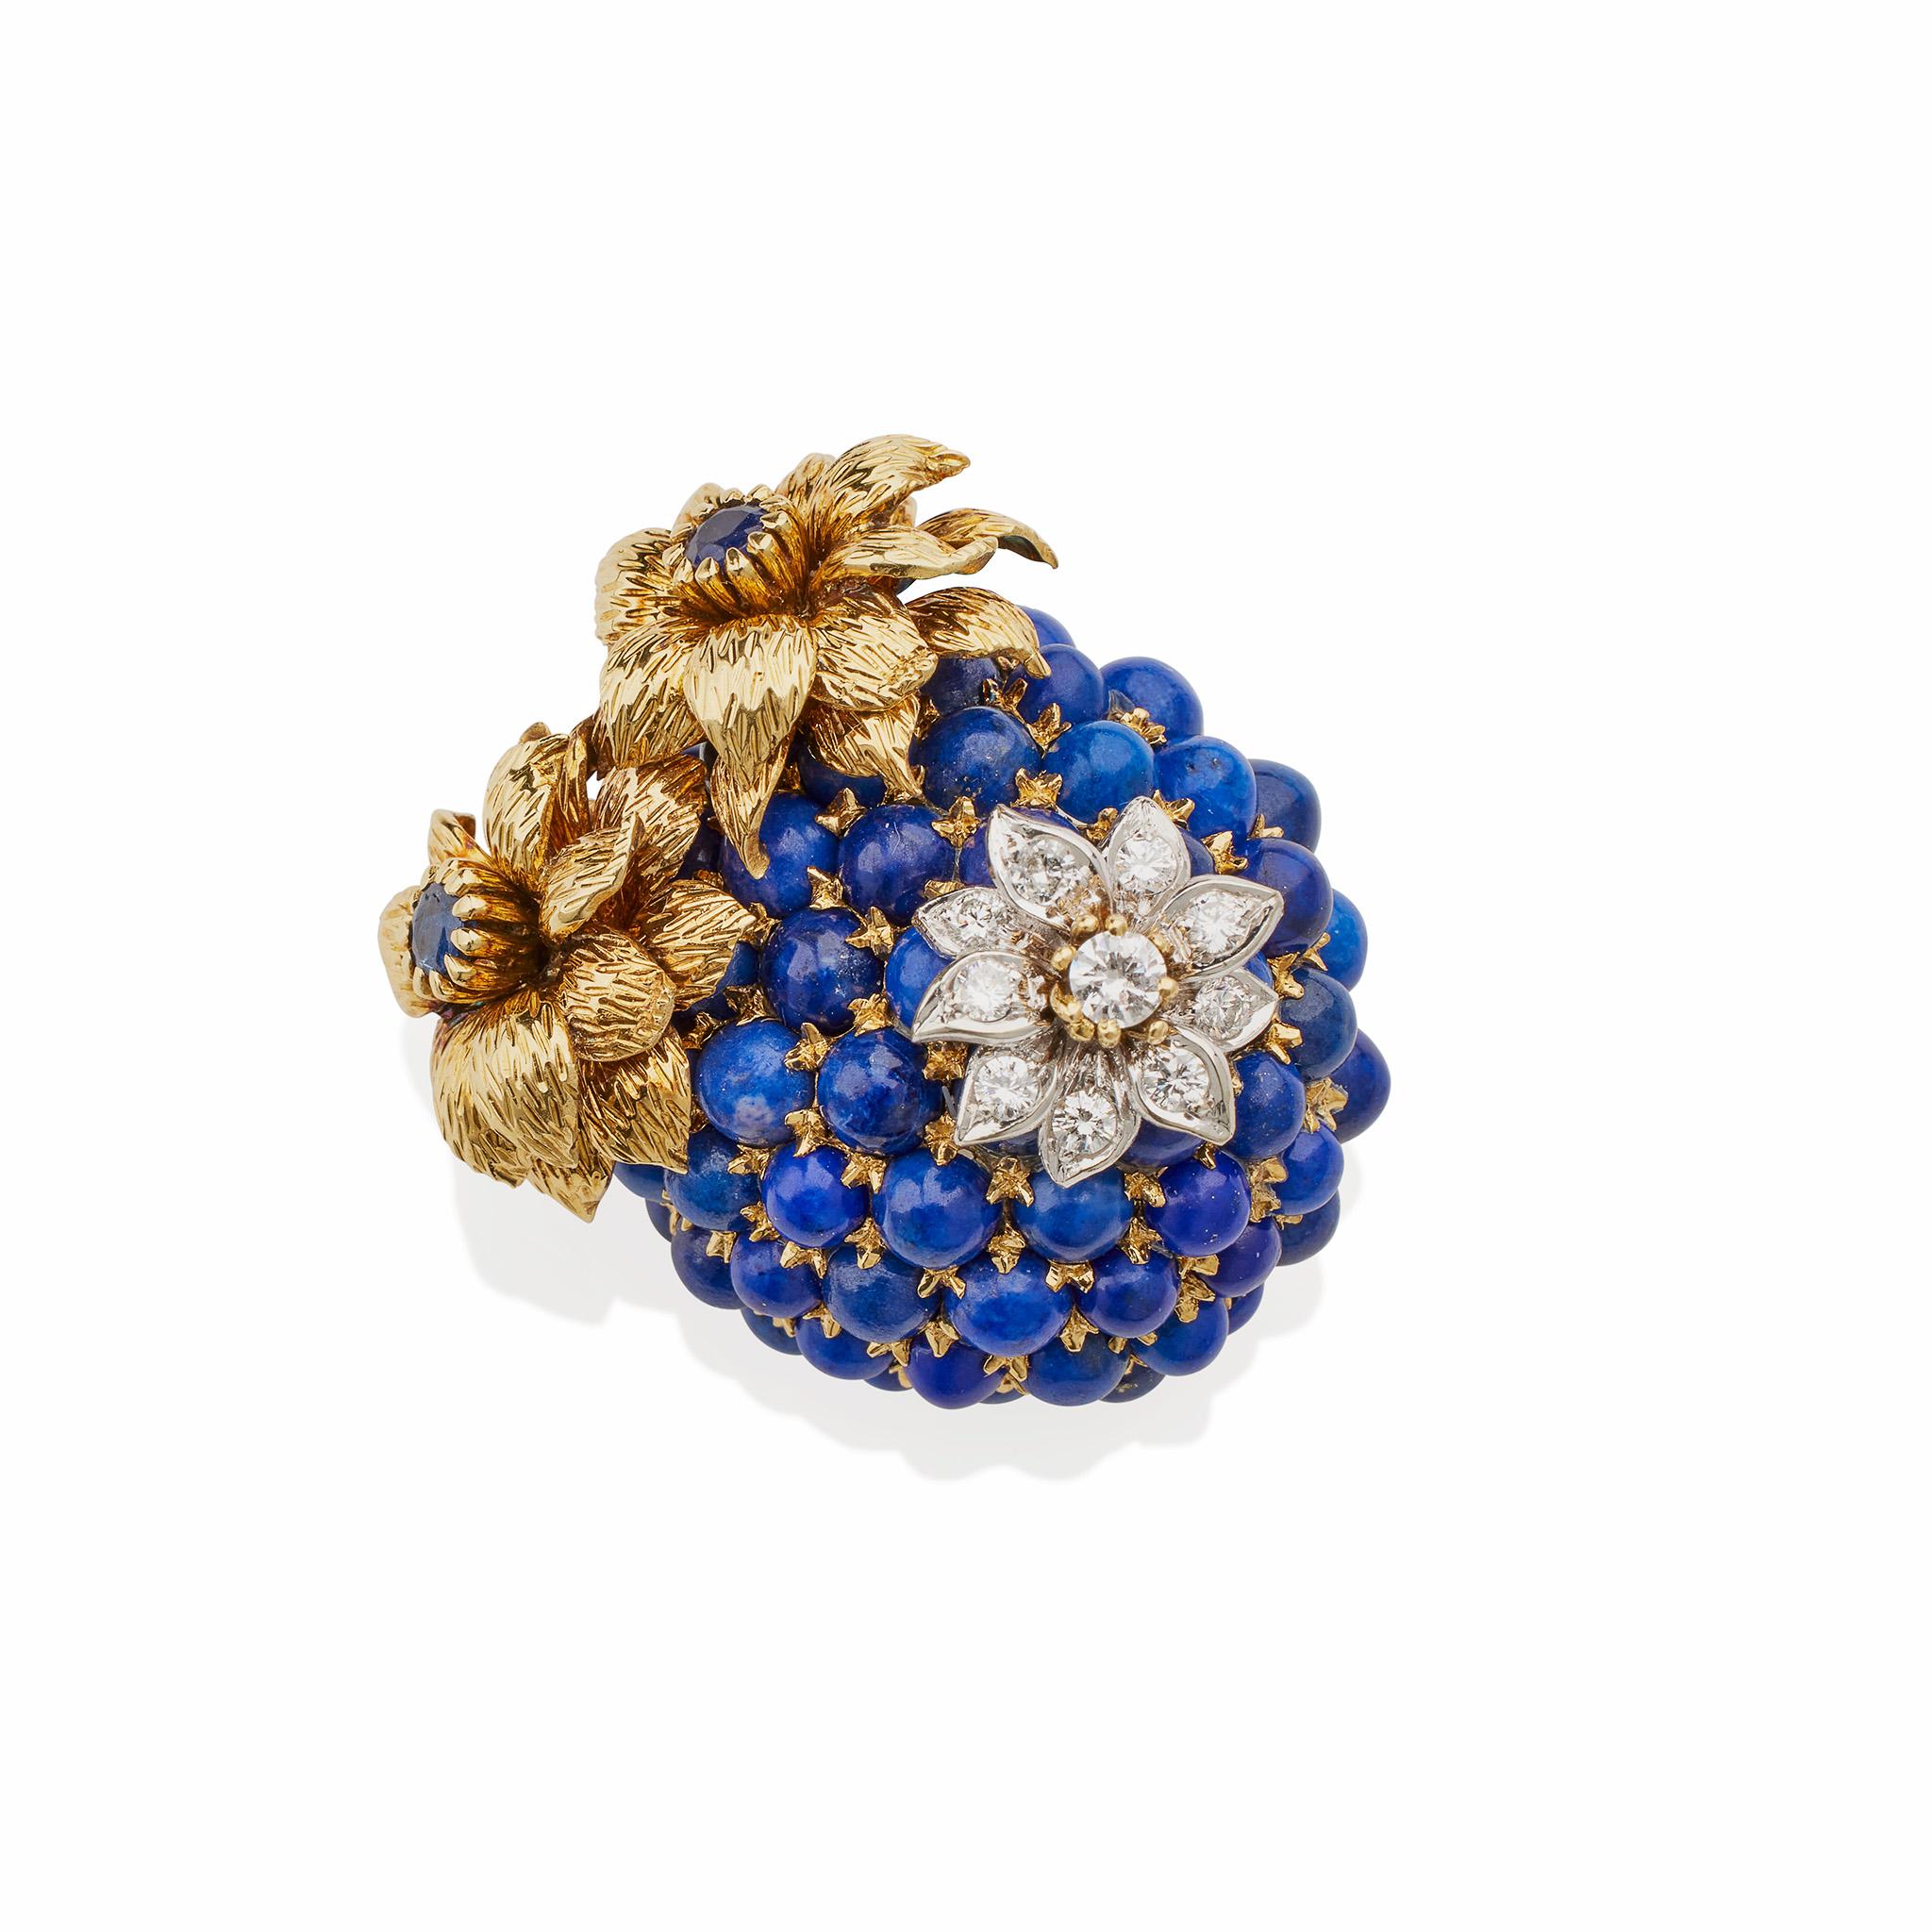 Created in 1968-1969, this Tiffany & Co. brooch is composed of bi-color 18K gold, lapis, and diamonds. It is designed as blue blossom or berry set with lapis lazuli cabochons, surmounted with a diamond floret and two gold florets accented by